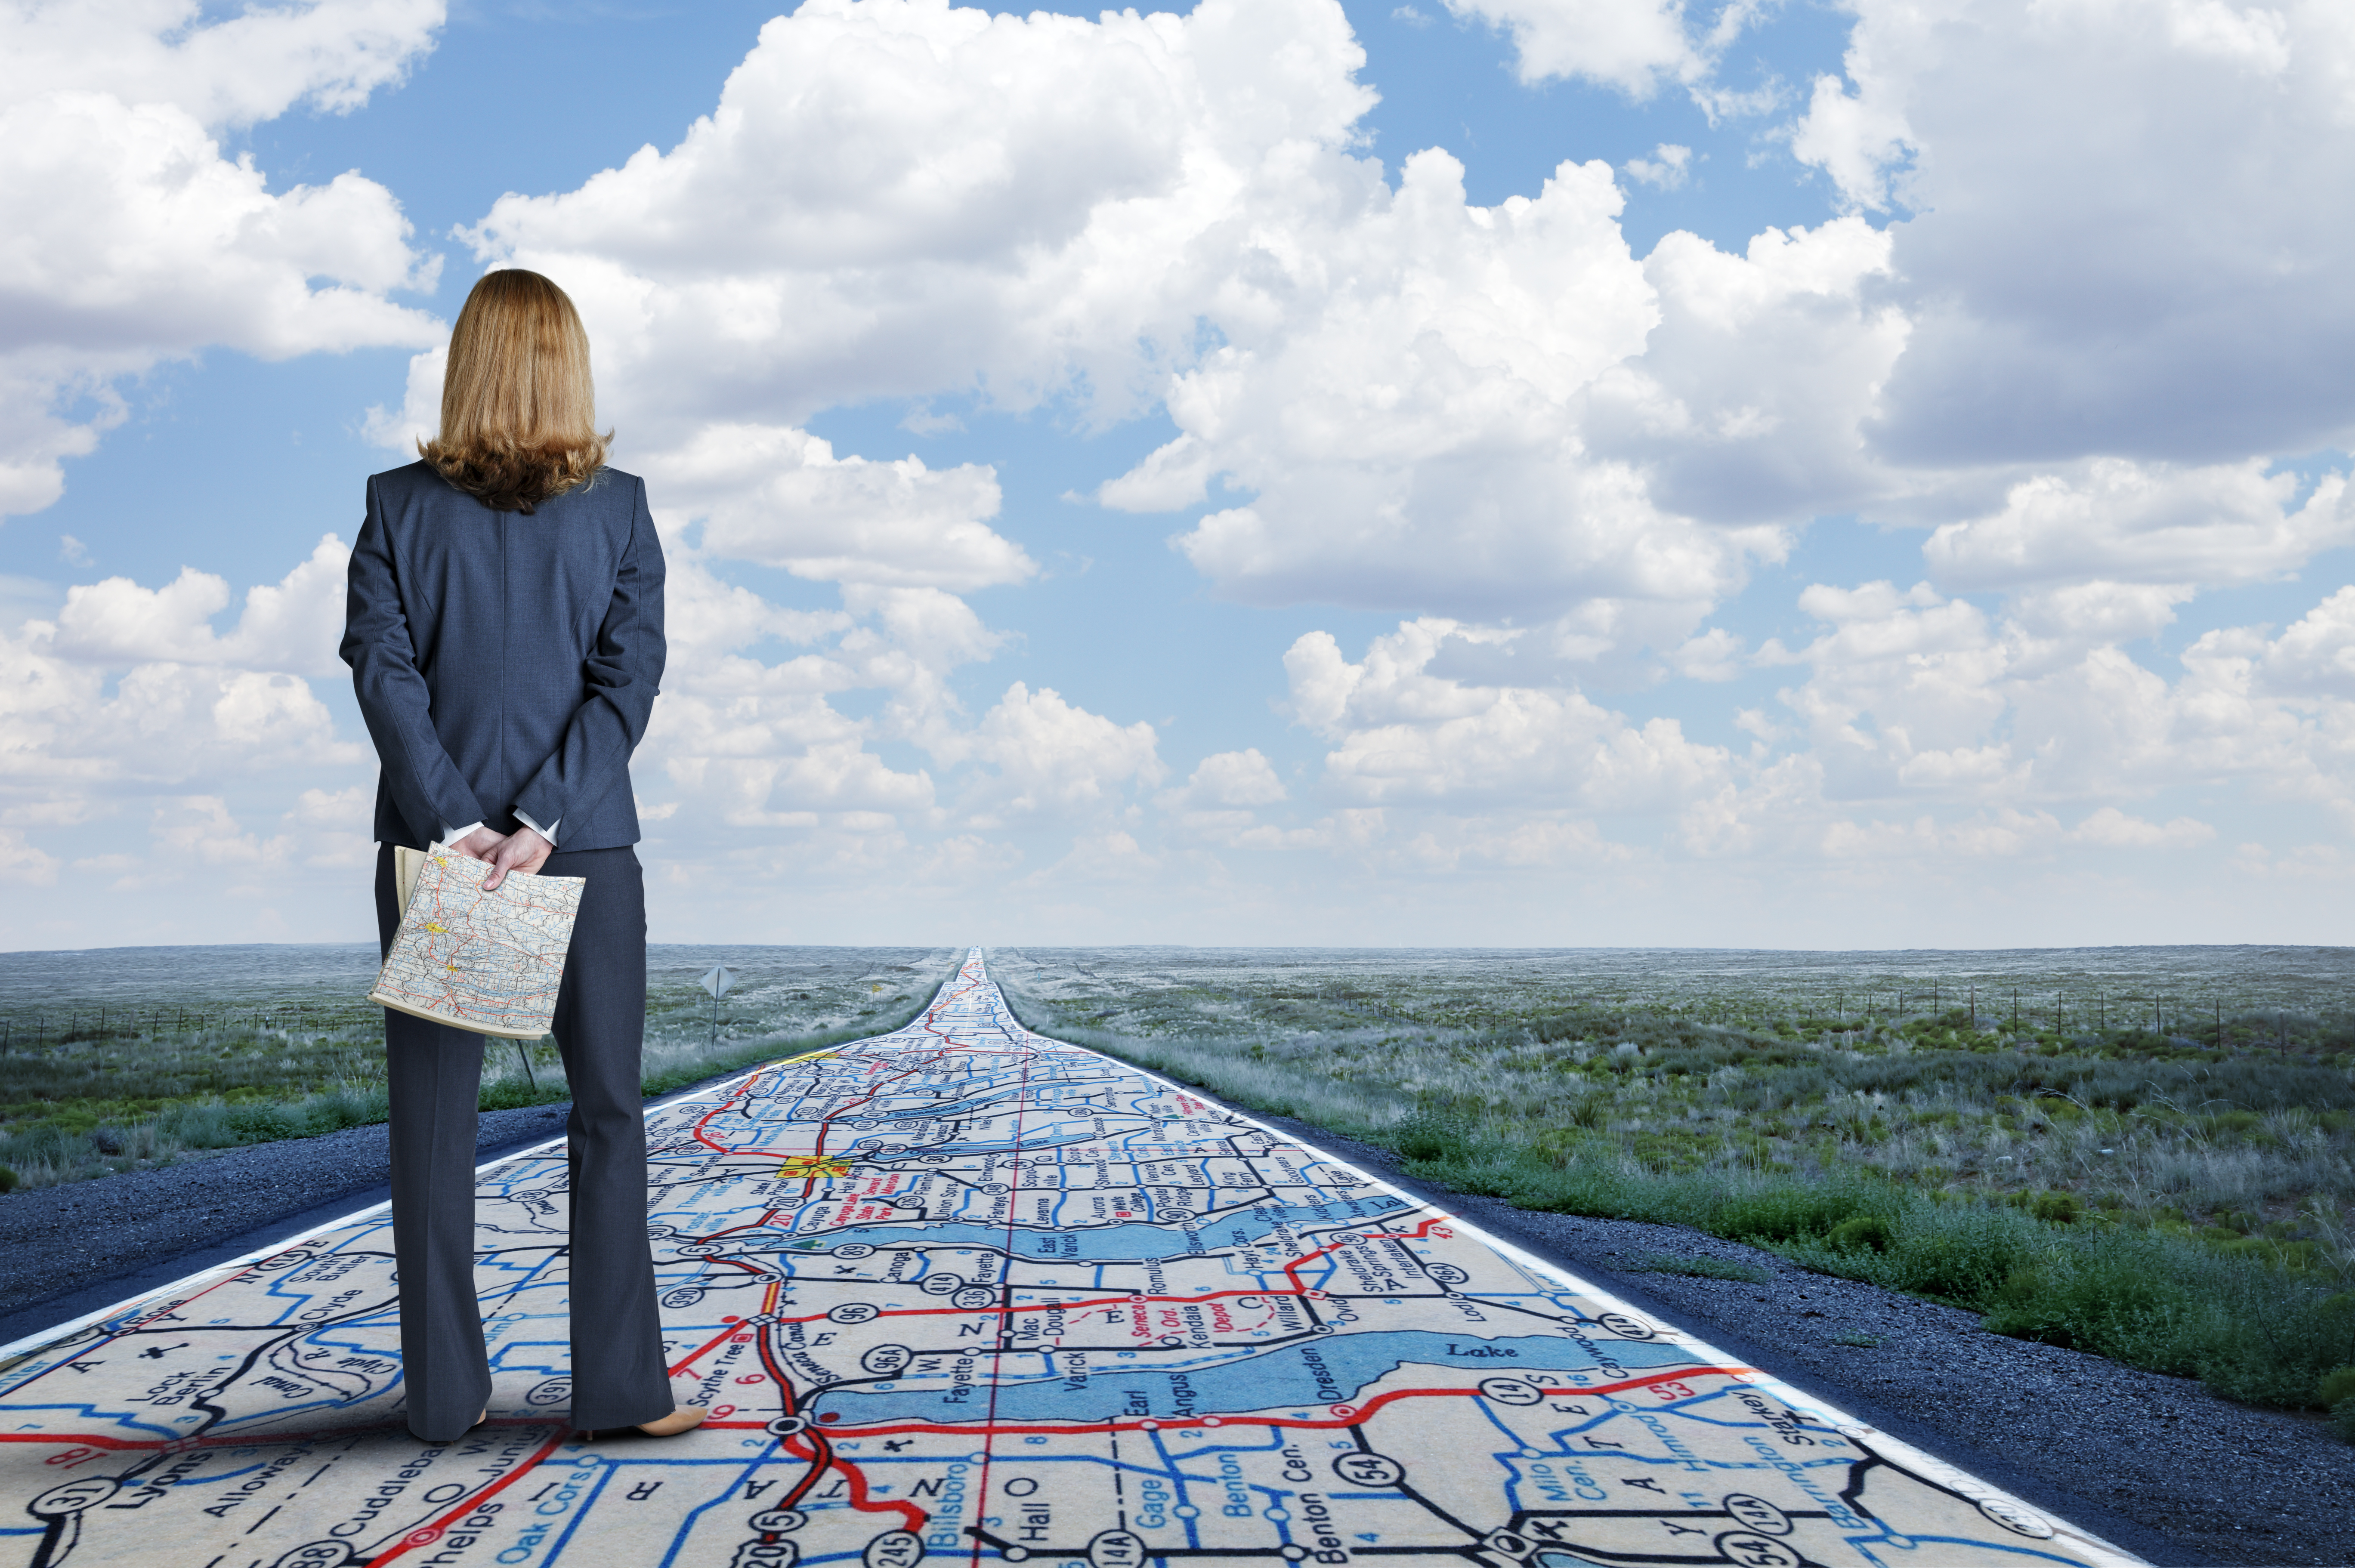 A businesswoman stands while holding a road map in her hands as she looks down a long, straight, rural road that has the same road map painted on it.